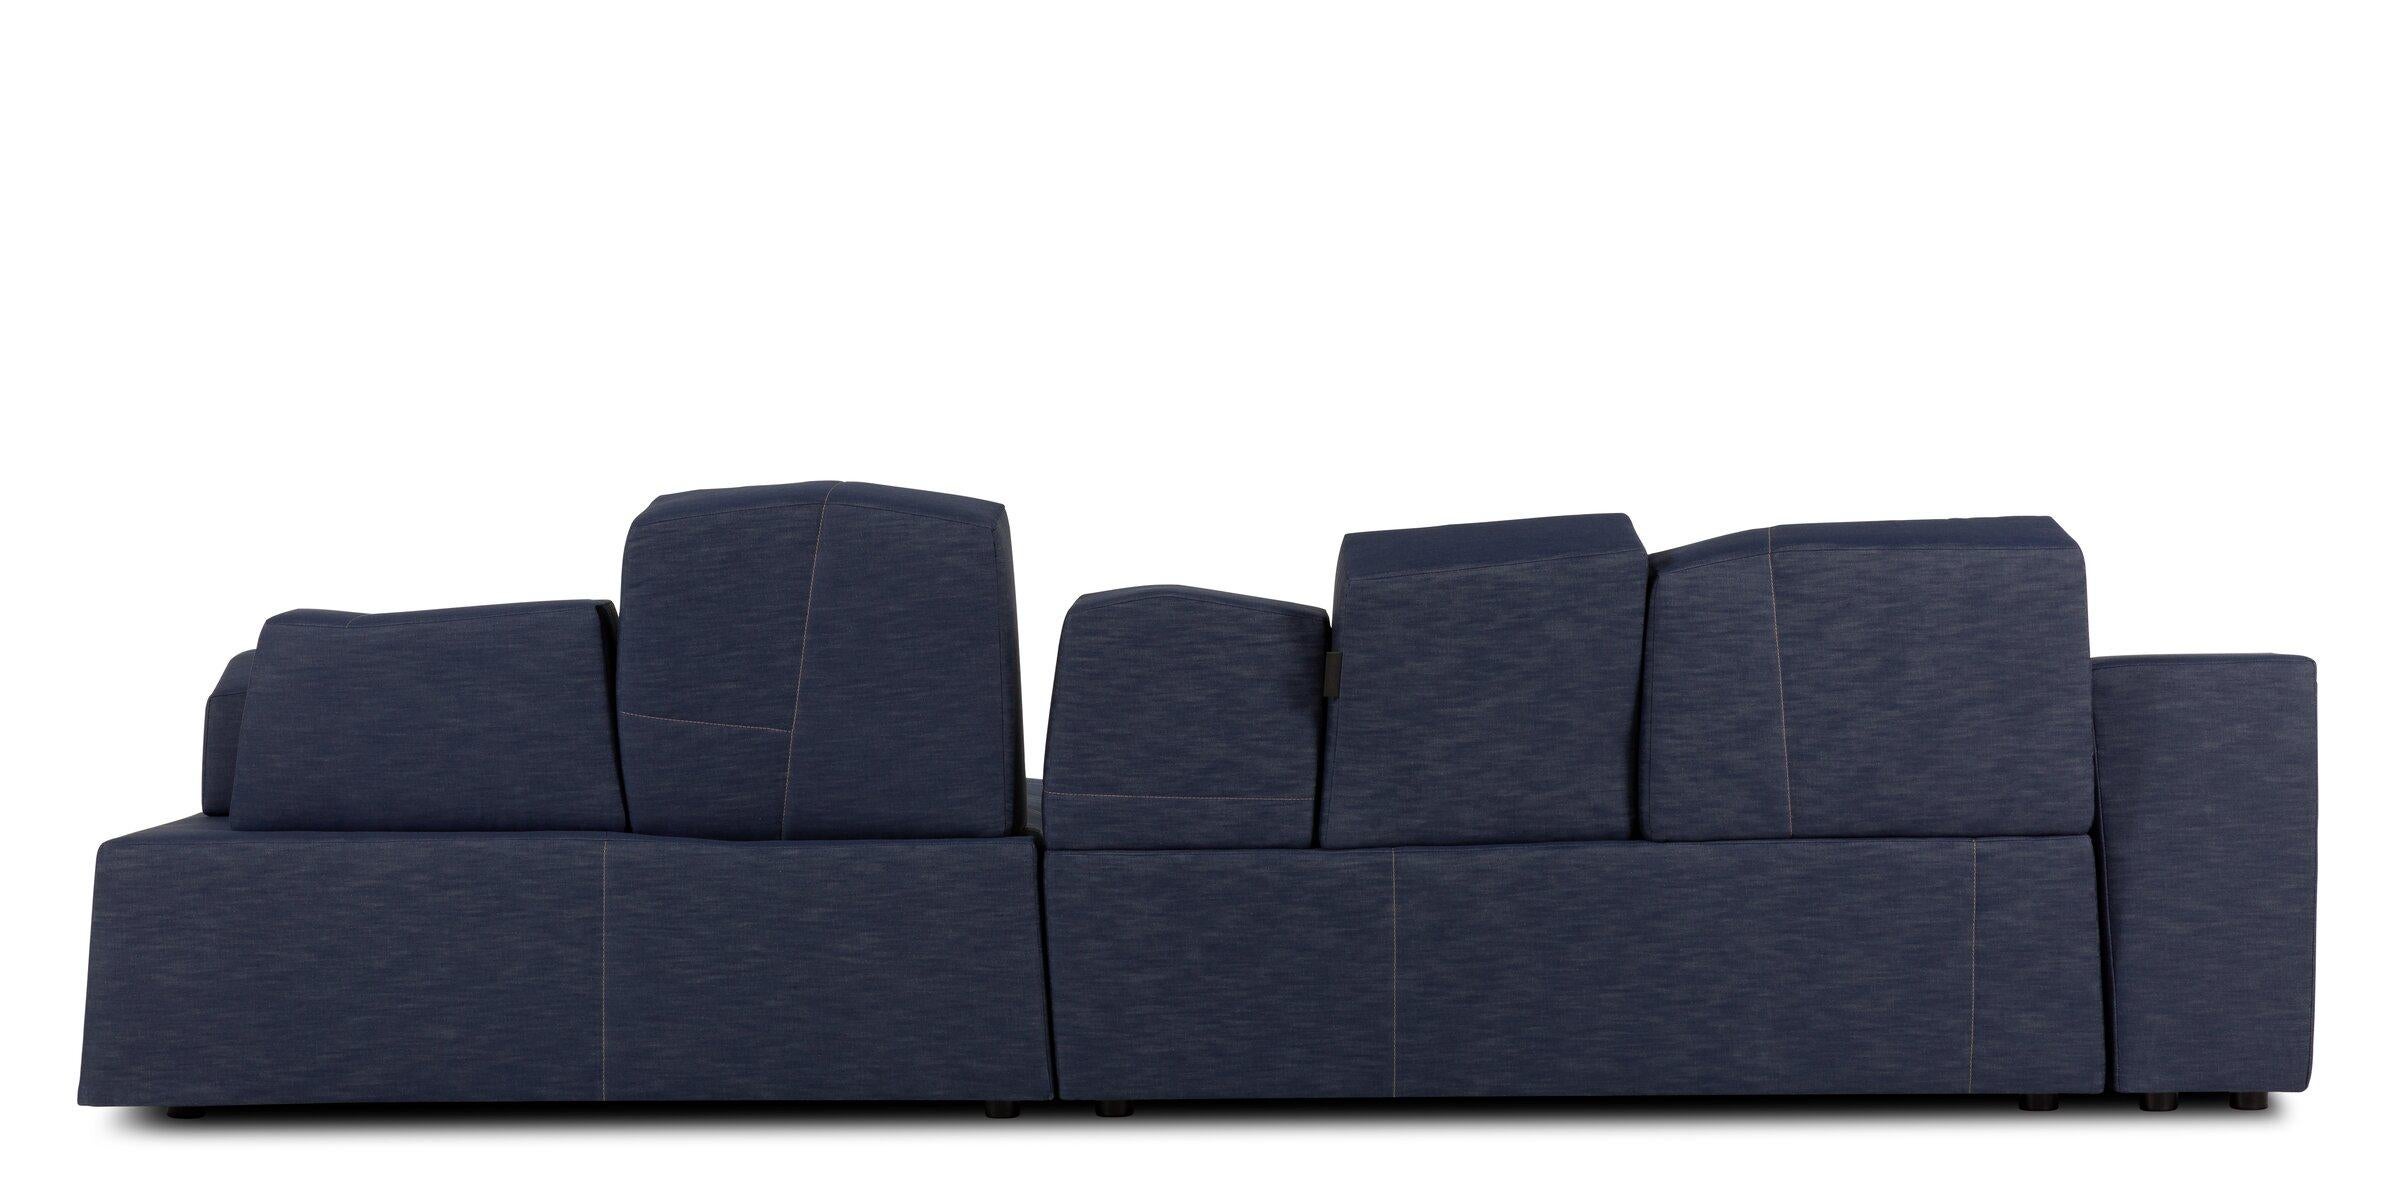 The something like this sofa is a celebration of the designer's love for sketchy drawings translated into a soft unusually modelled sofa.

Additional information:
Material: Wood and steel frame construction, foam
Upholstery: Denim Indigo - Cat